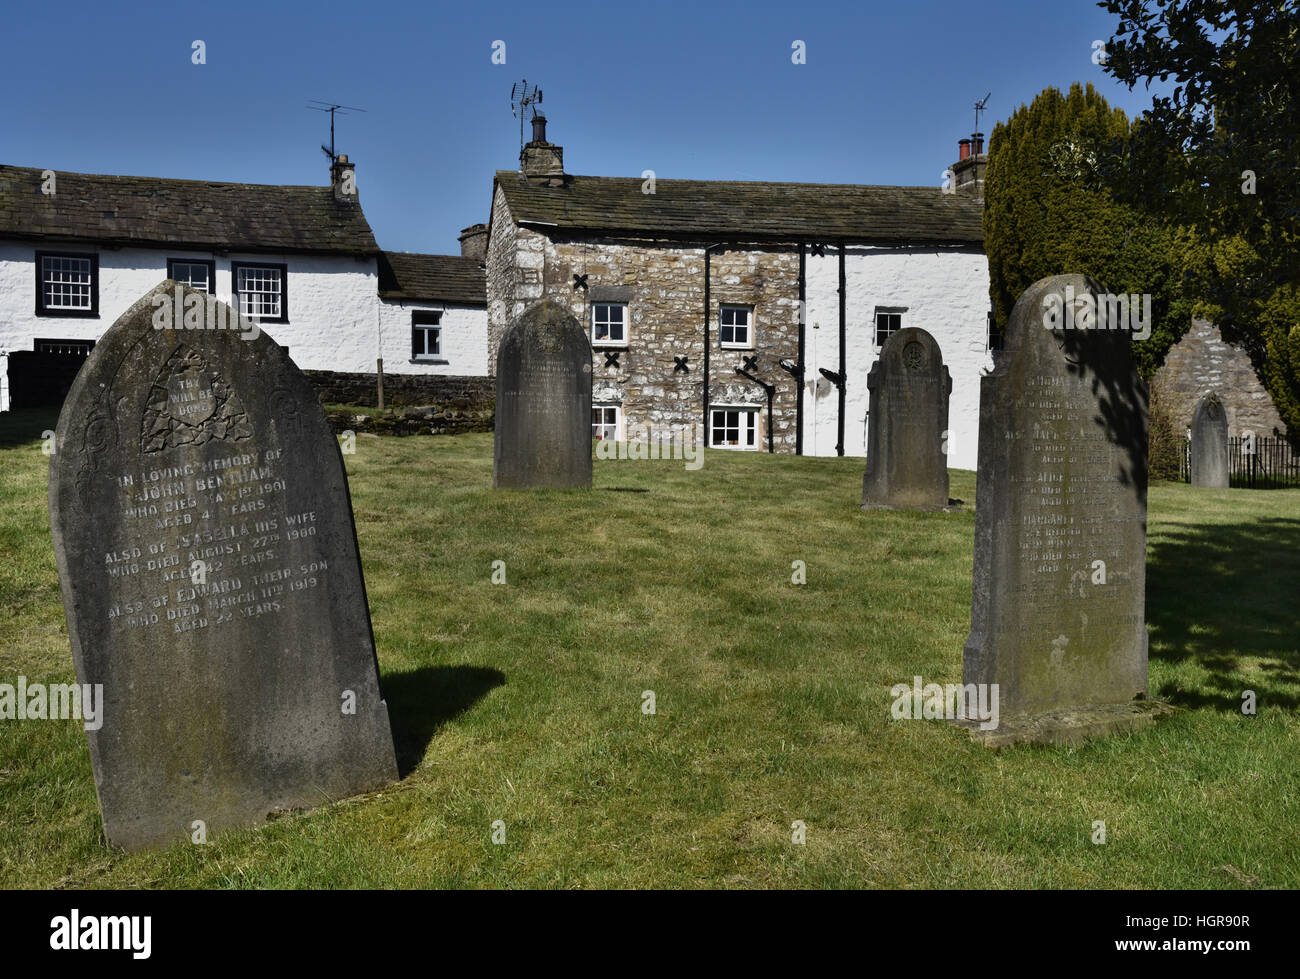 St Andrew's church, and graveyard, Dent Village, Cumbria, Yorkshire Dales National Park, England, UK. Stock Photo